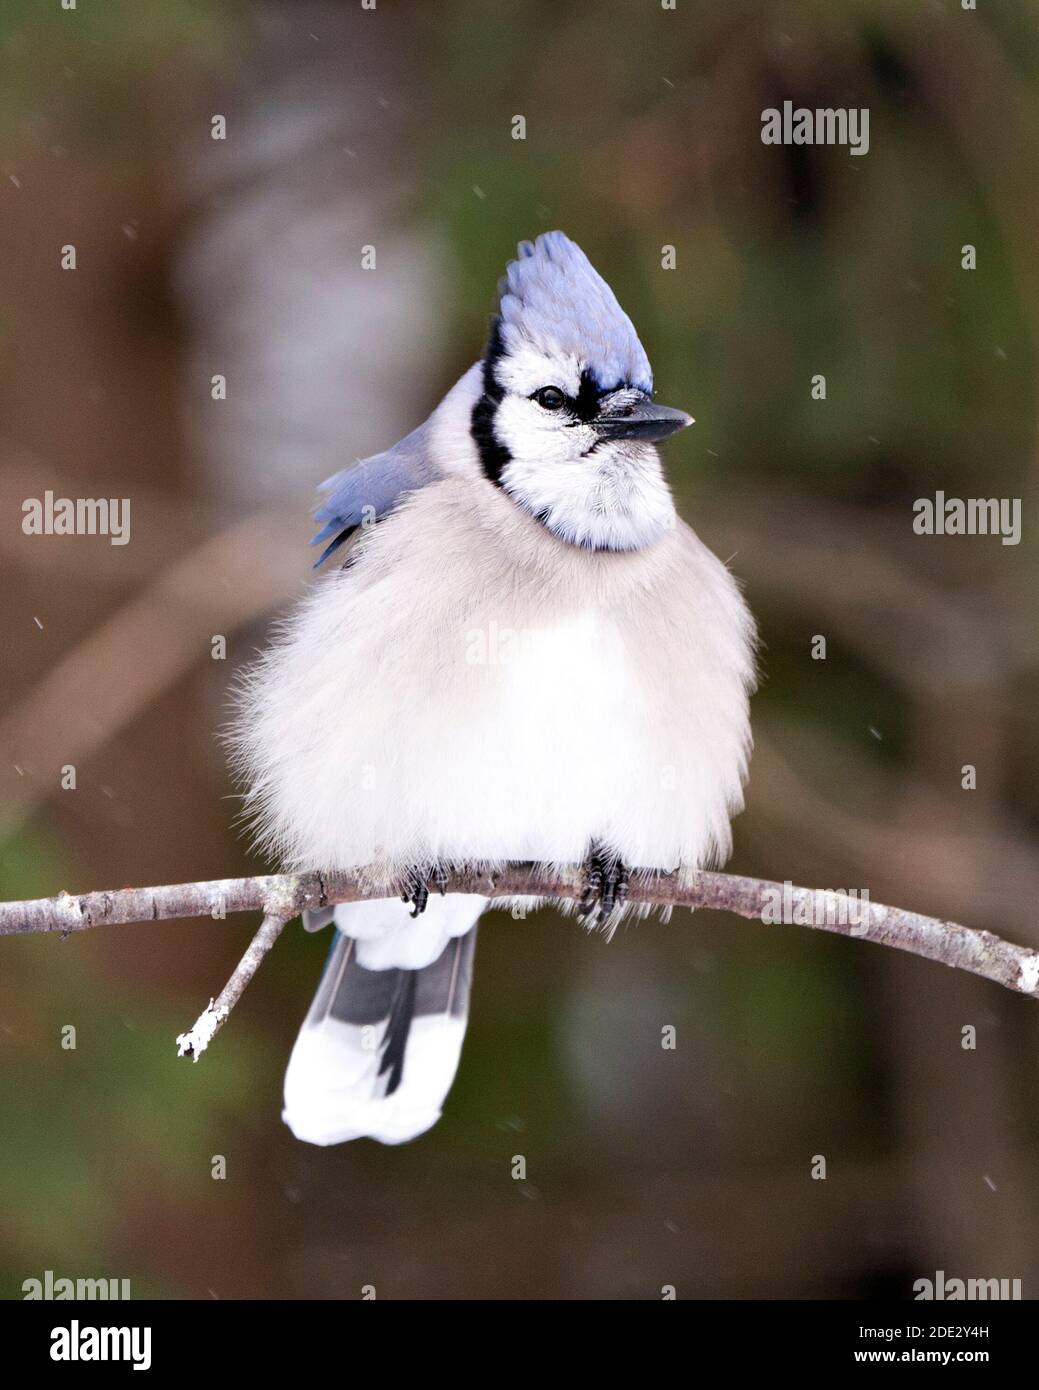 Blue Jay Stock Photos. Blue Jay perched on a branch with a blur background in the forest environment and habitat. Image. Picture. Portrait. Stock Photo